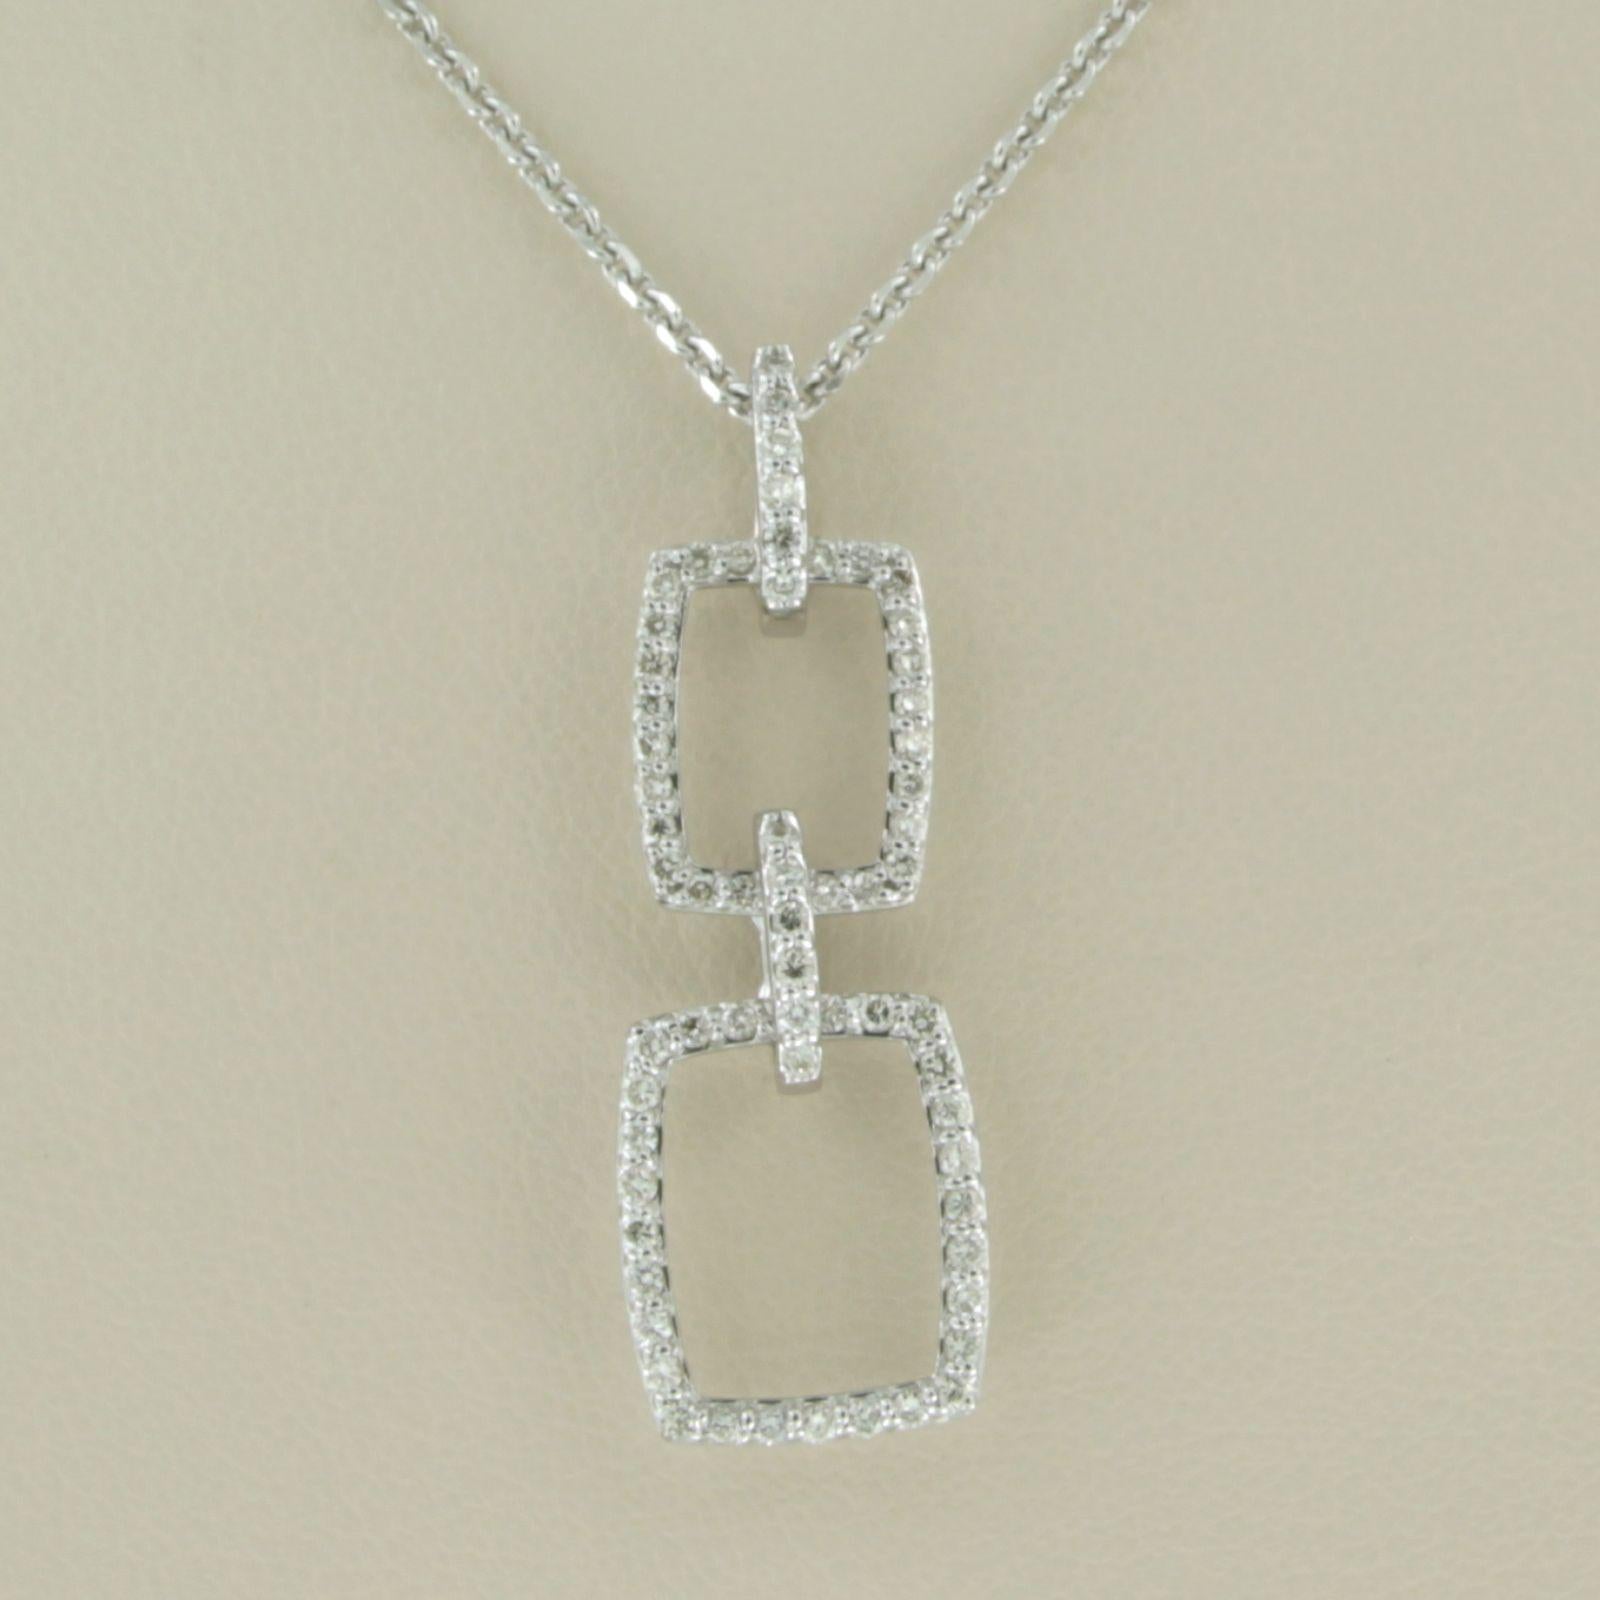 Necklace and pendant set with diamonds 18k white gold 40 cm long In Good Condition For Sale In The Hague, ZH